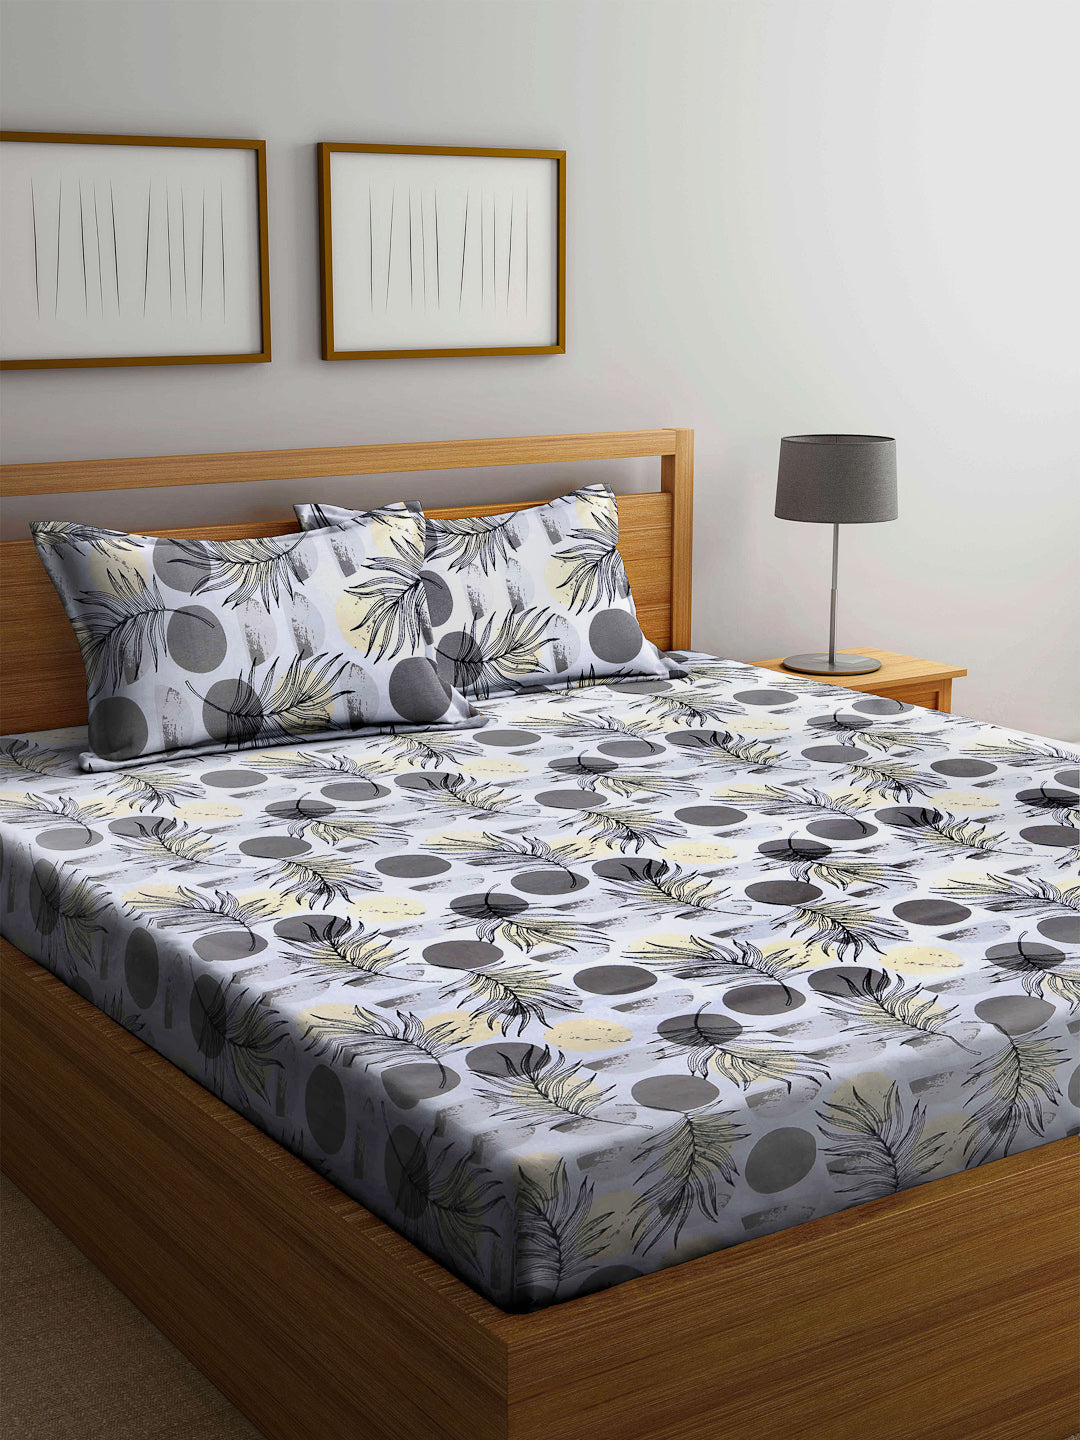 Arrabi Grey Floral 100% Cotton King Size Double Bedsheet with 2 Pillow Covers (250 X 215 cm)